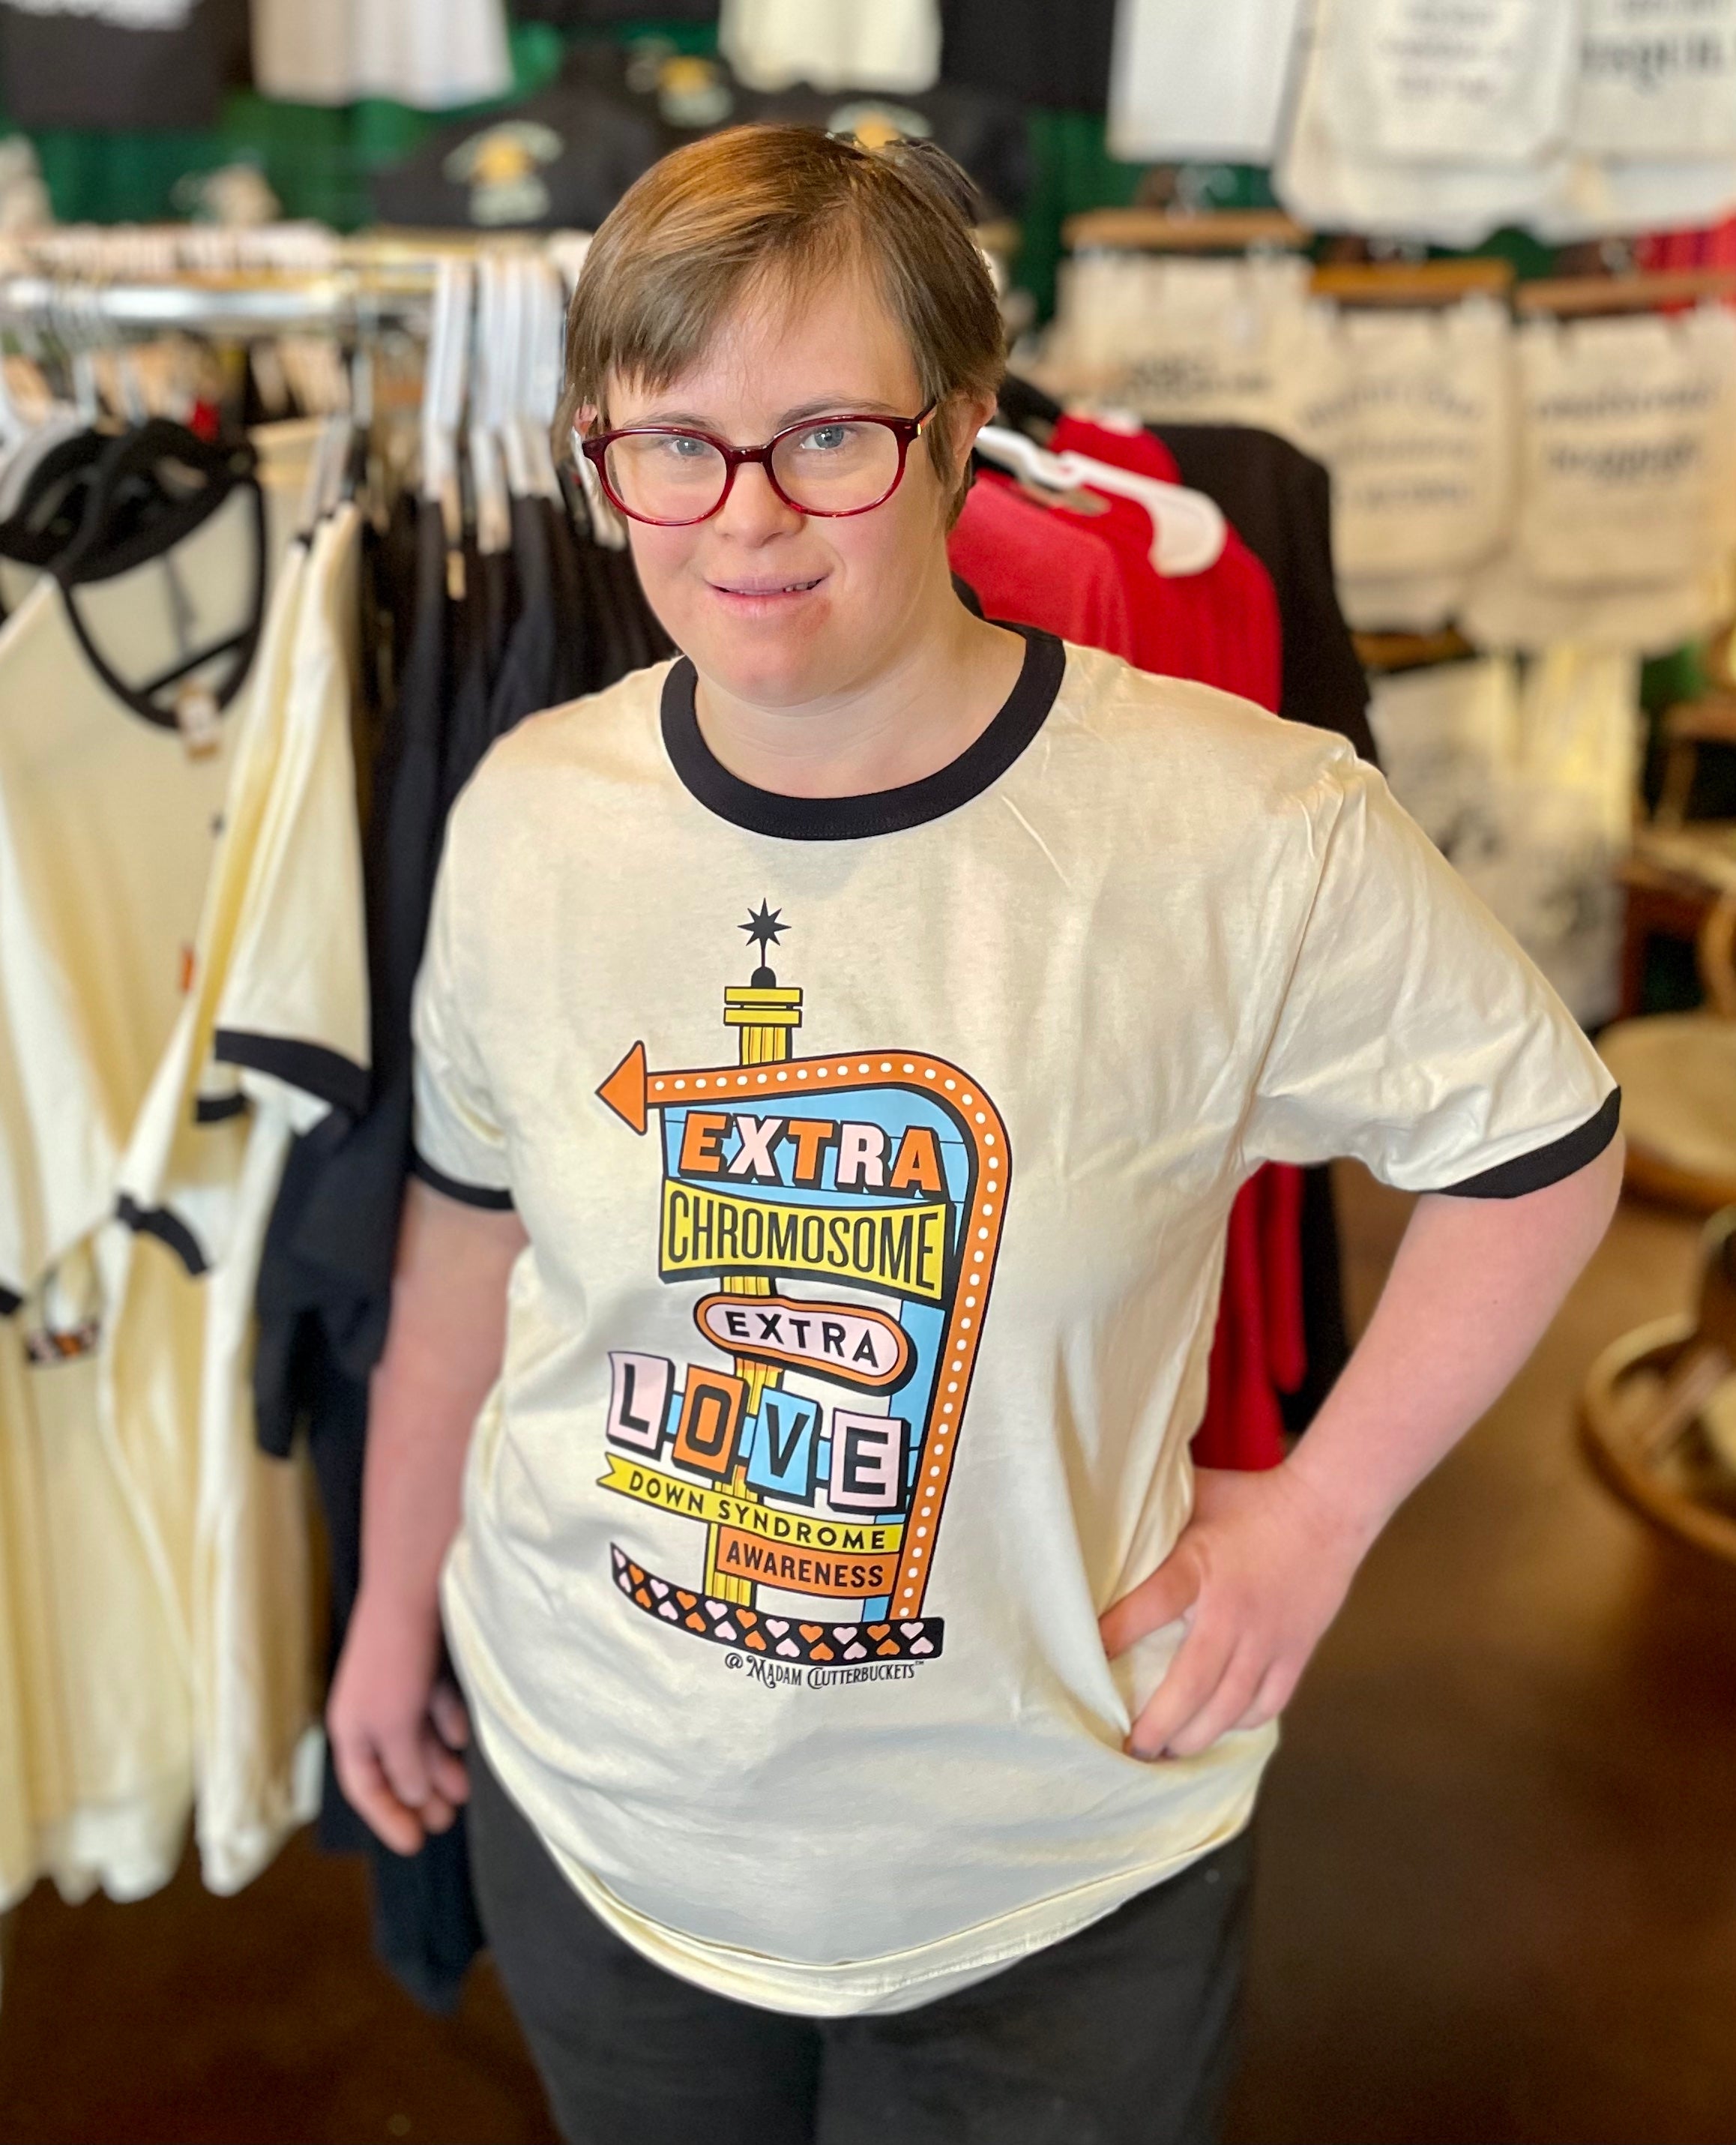 Extra Chromosome, Extra Love Clutterbucket's T-shirt!